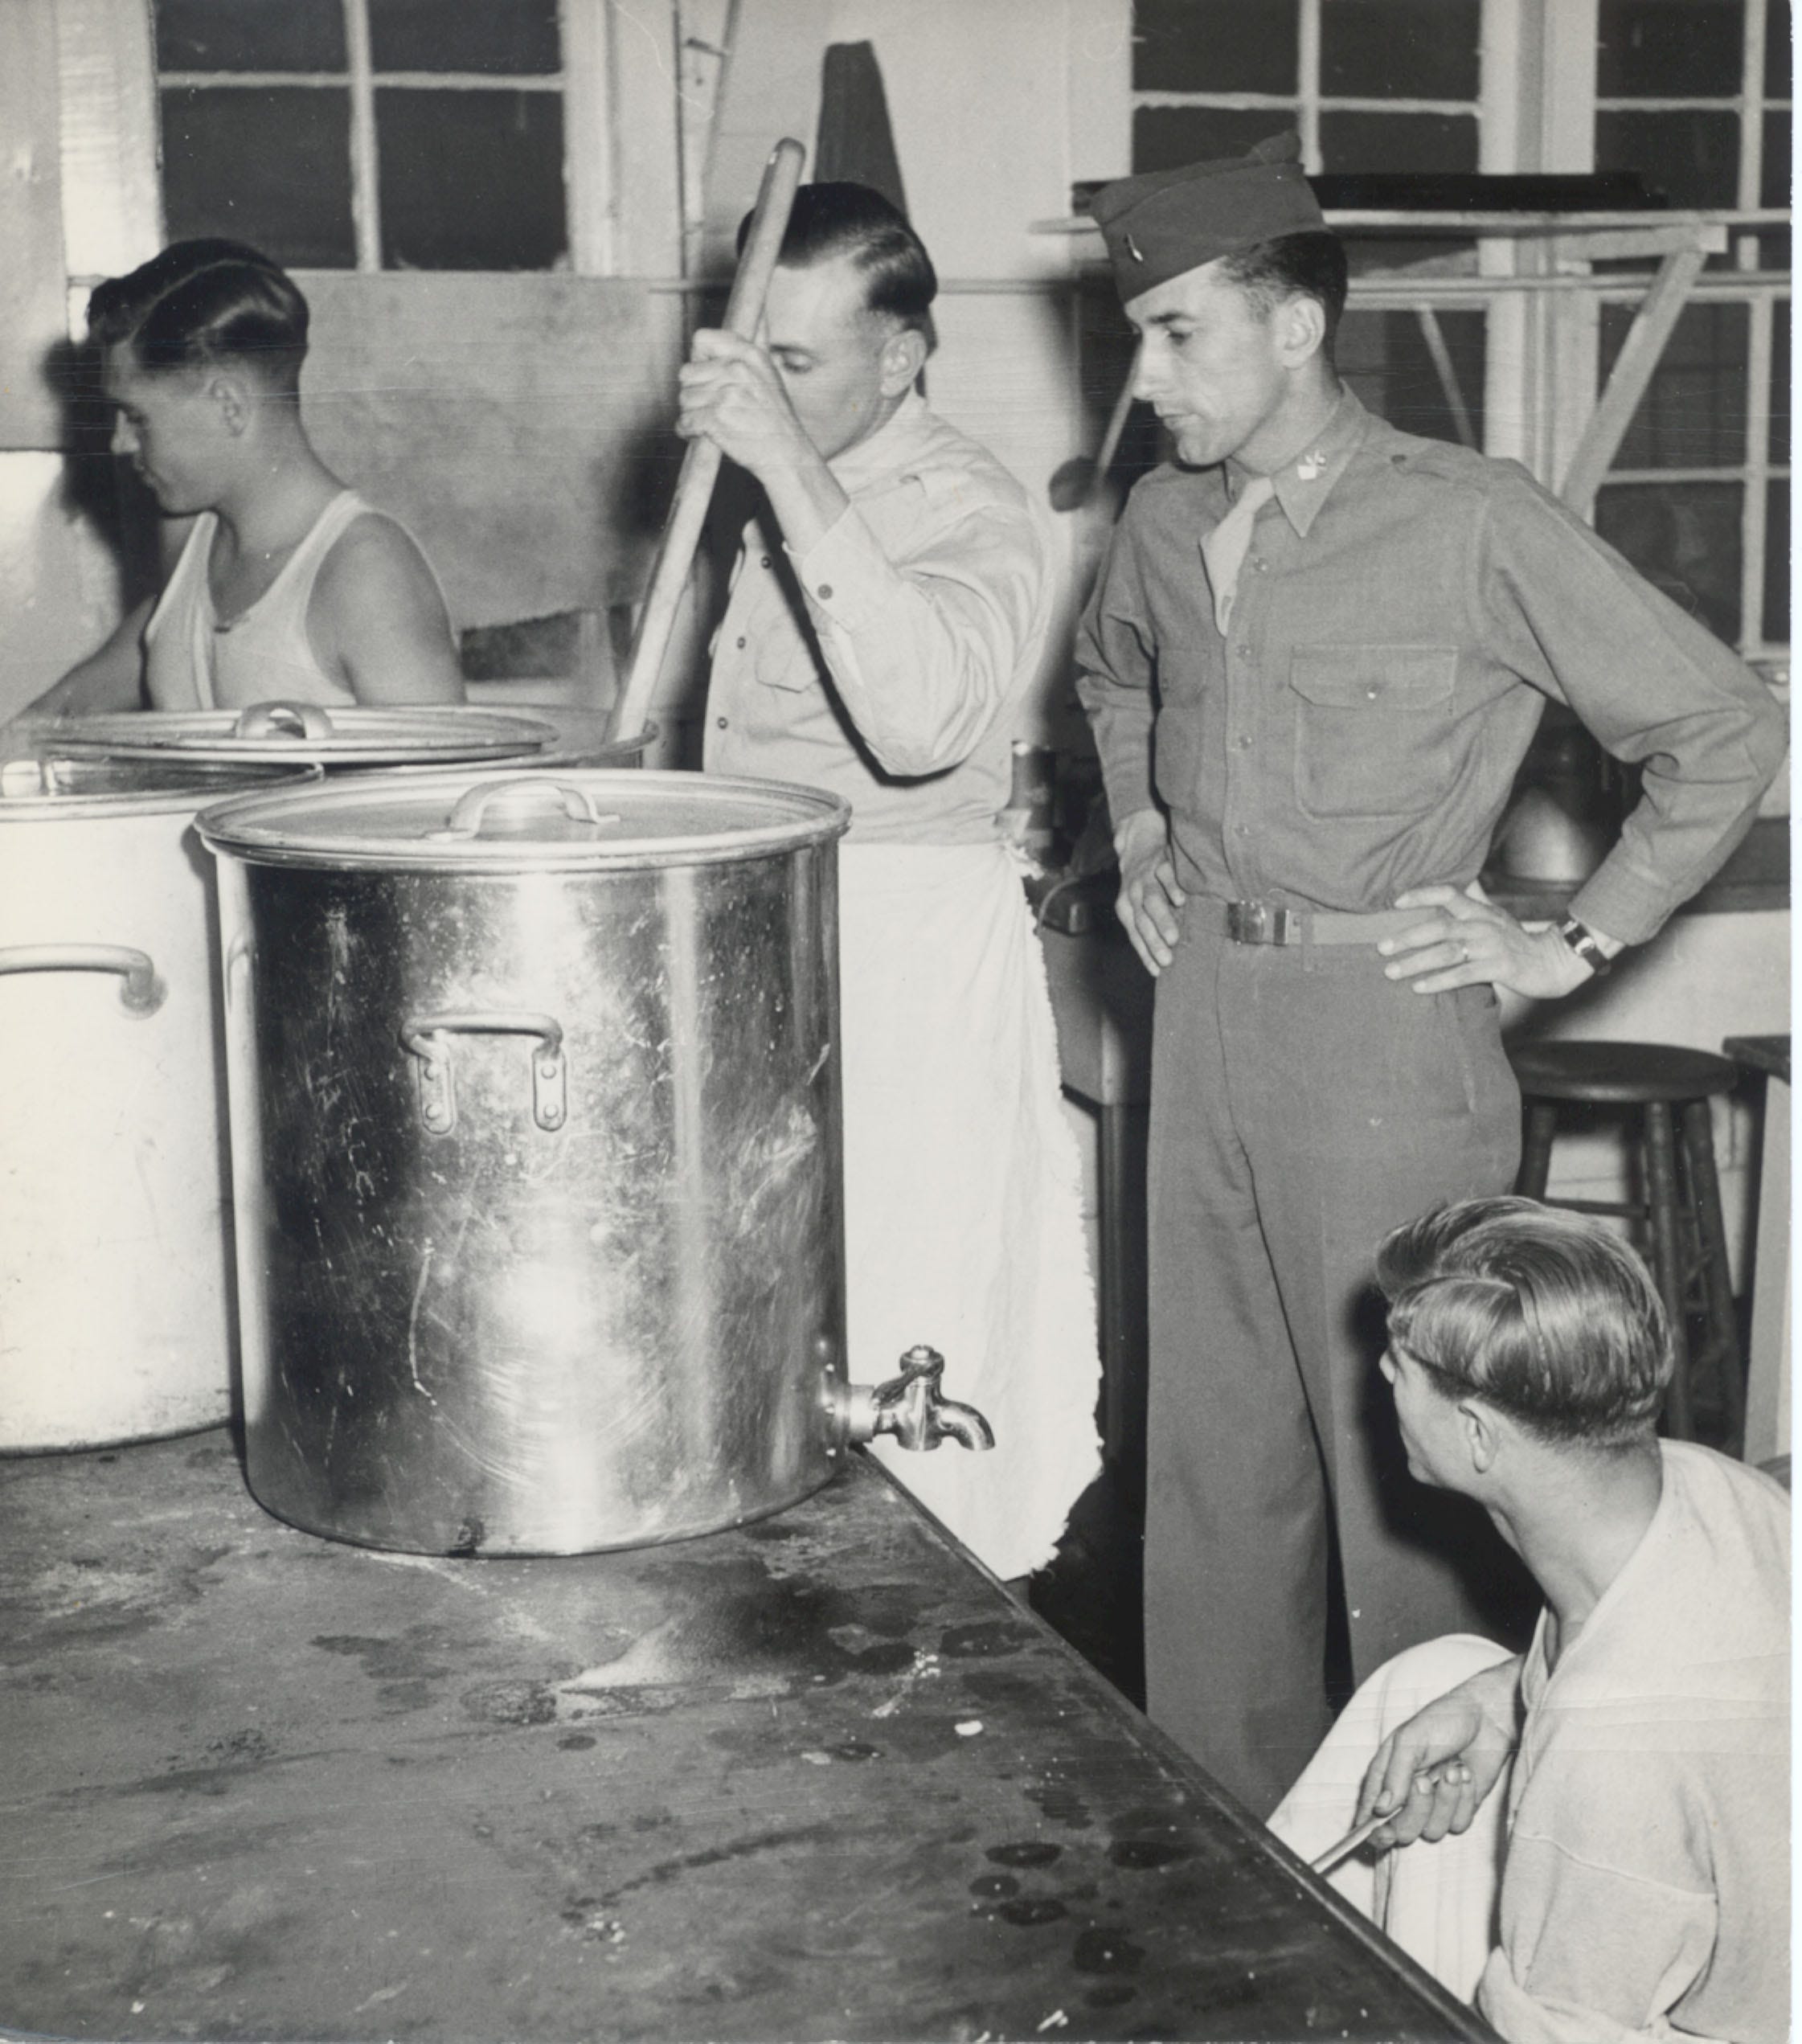 German POWs work in the kitchen at a detention camp in Door County during World War II. Prisoners were housed throughout the county, including Sturgeon Bay,  Fish Creek and Ellison Bay to help harvest crops and work in canneries.